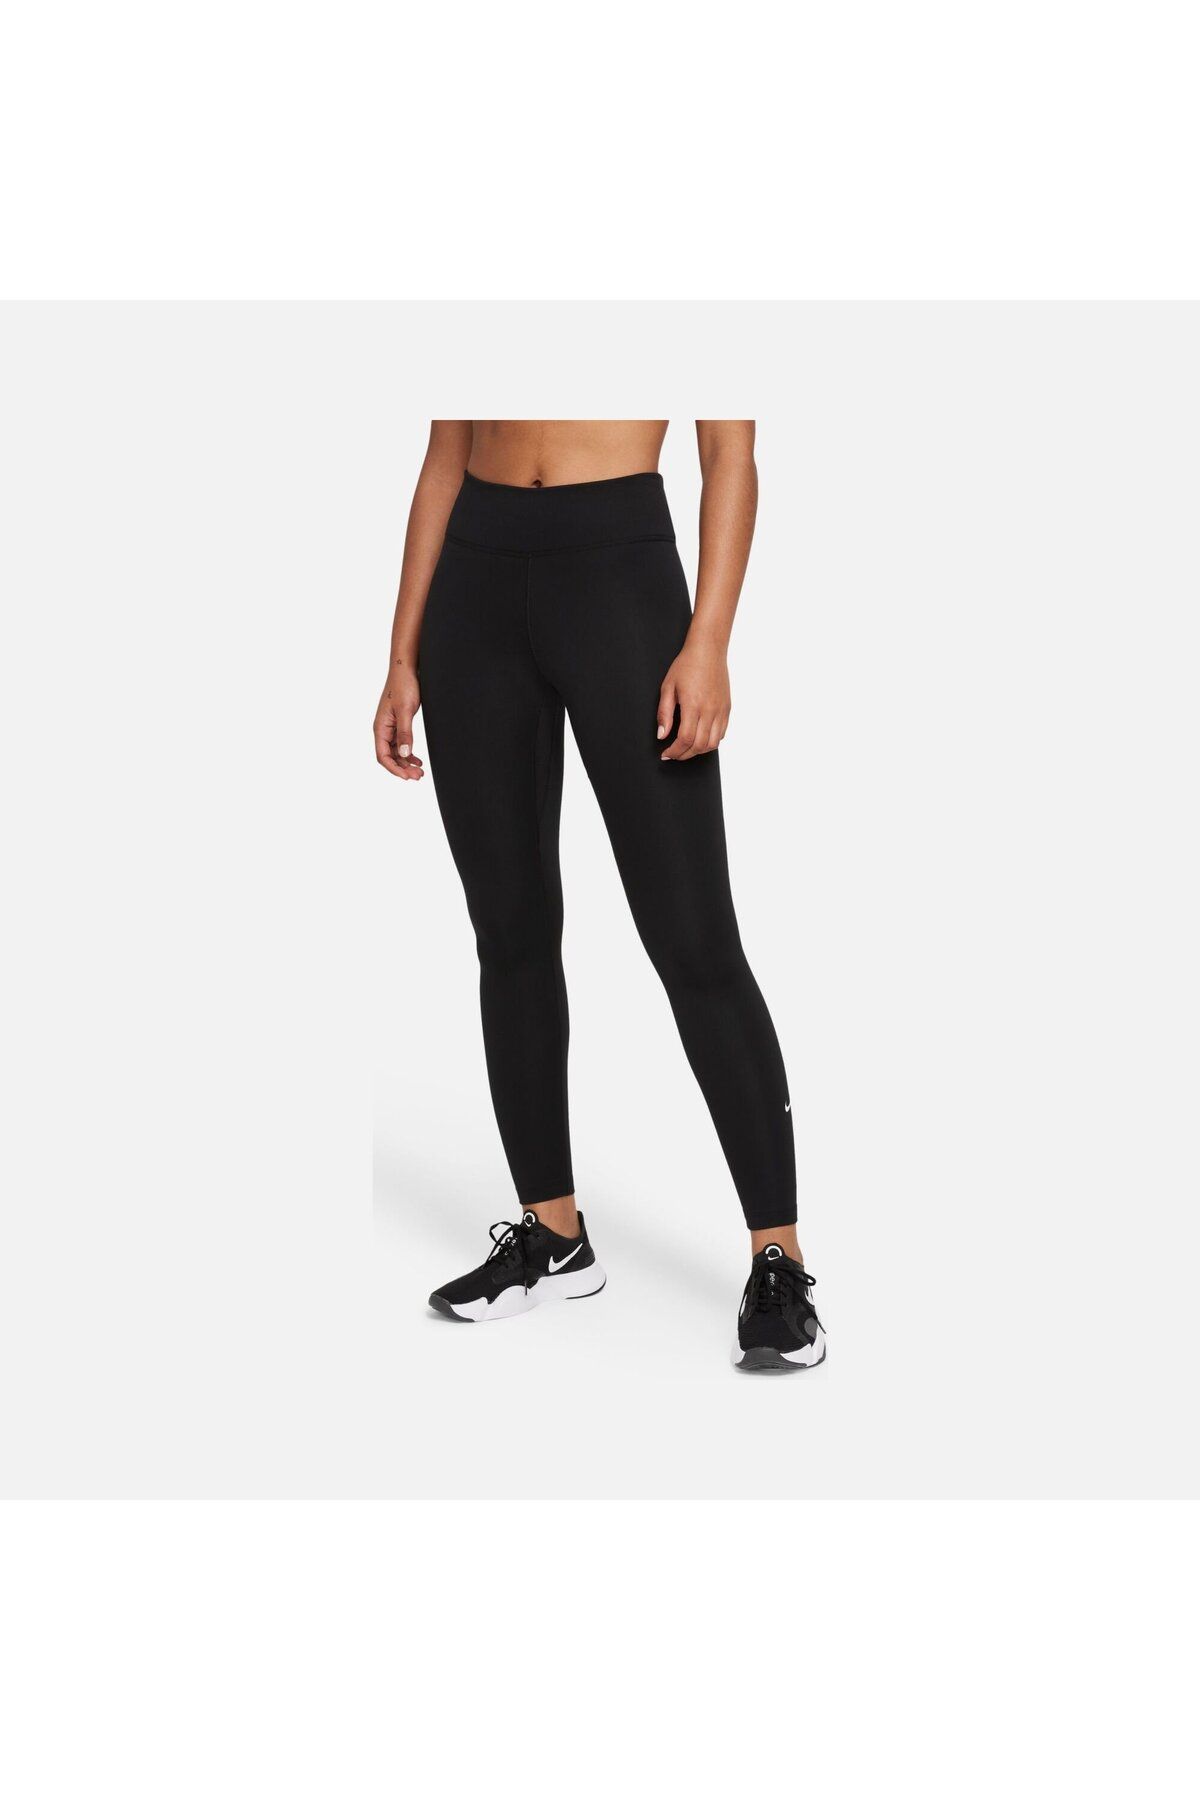 Nike One Therma-FIT Mid Rise Women's Black Tights DD5475-010